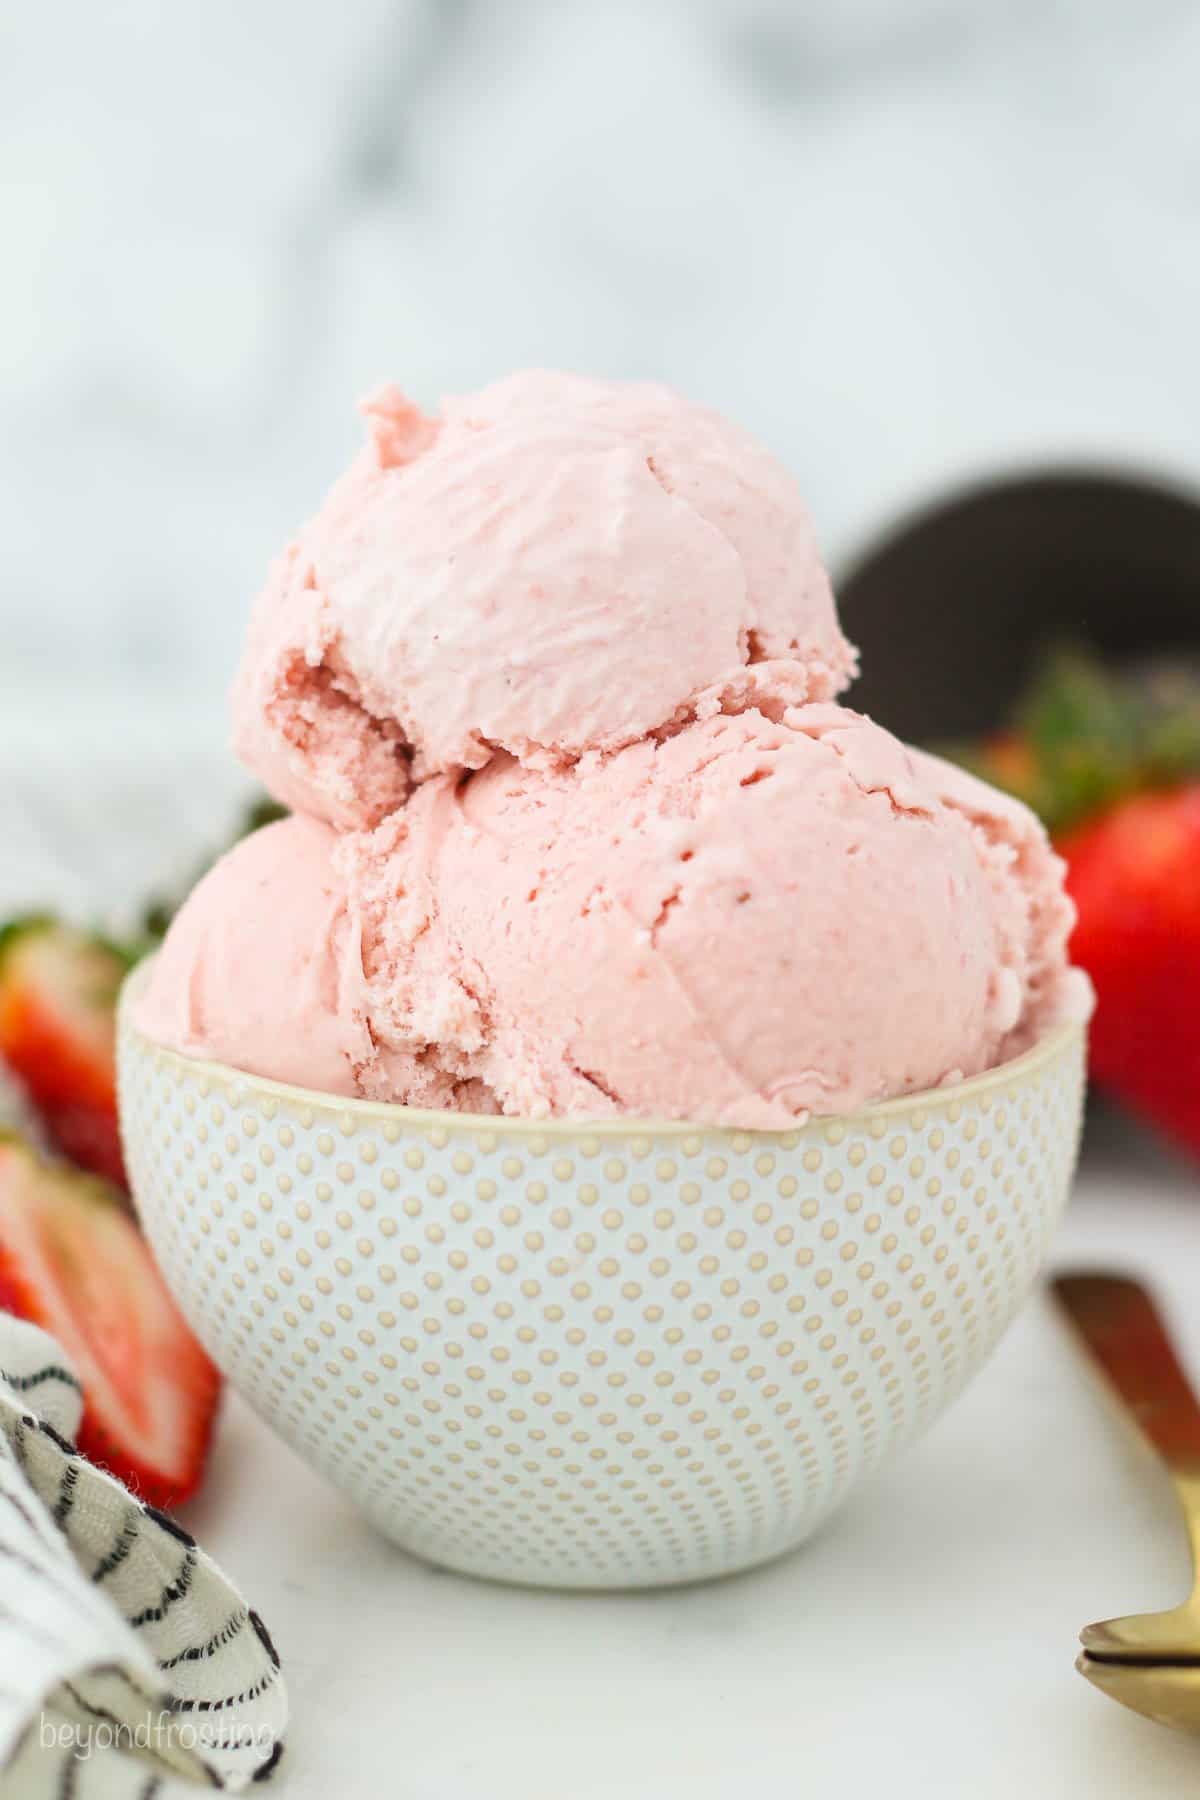 A heaping bowl of strawberry ice cream